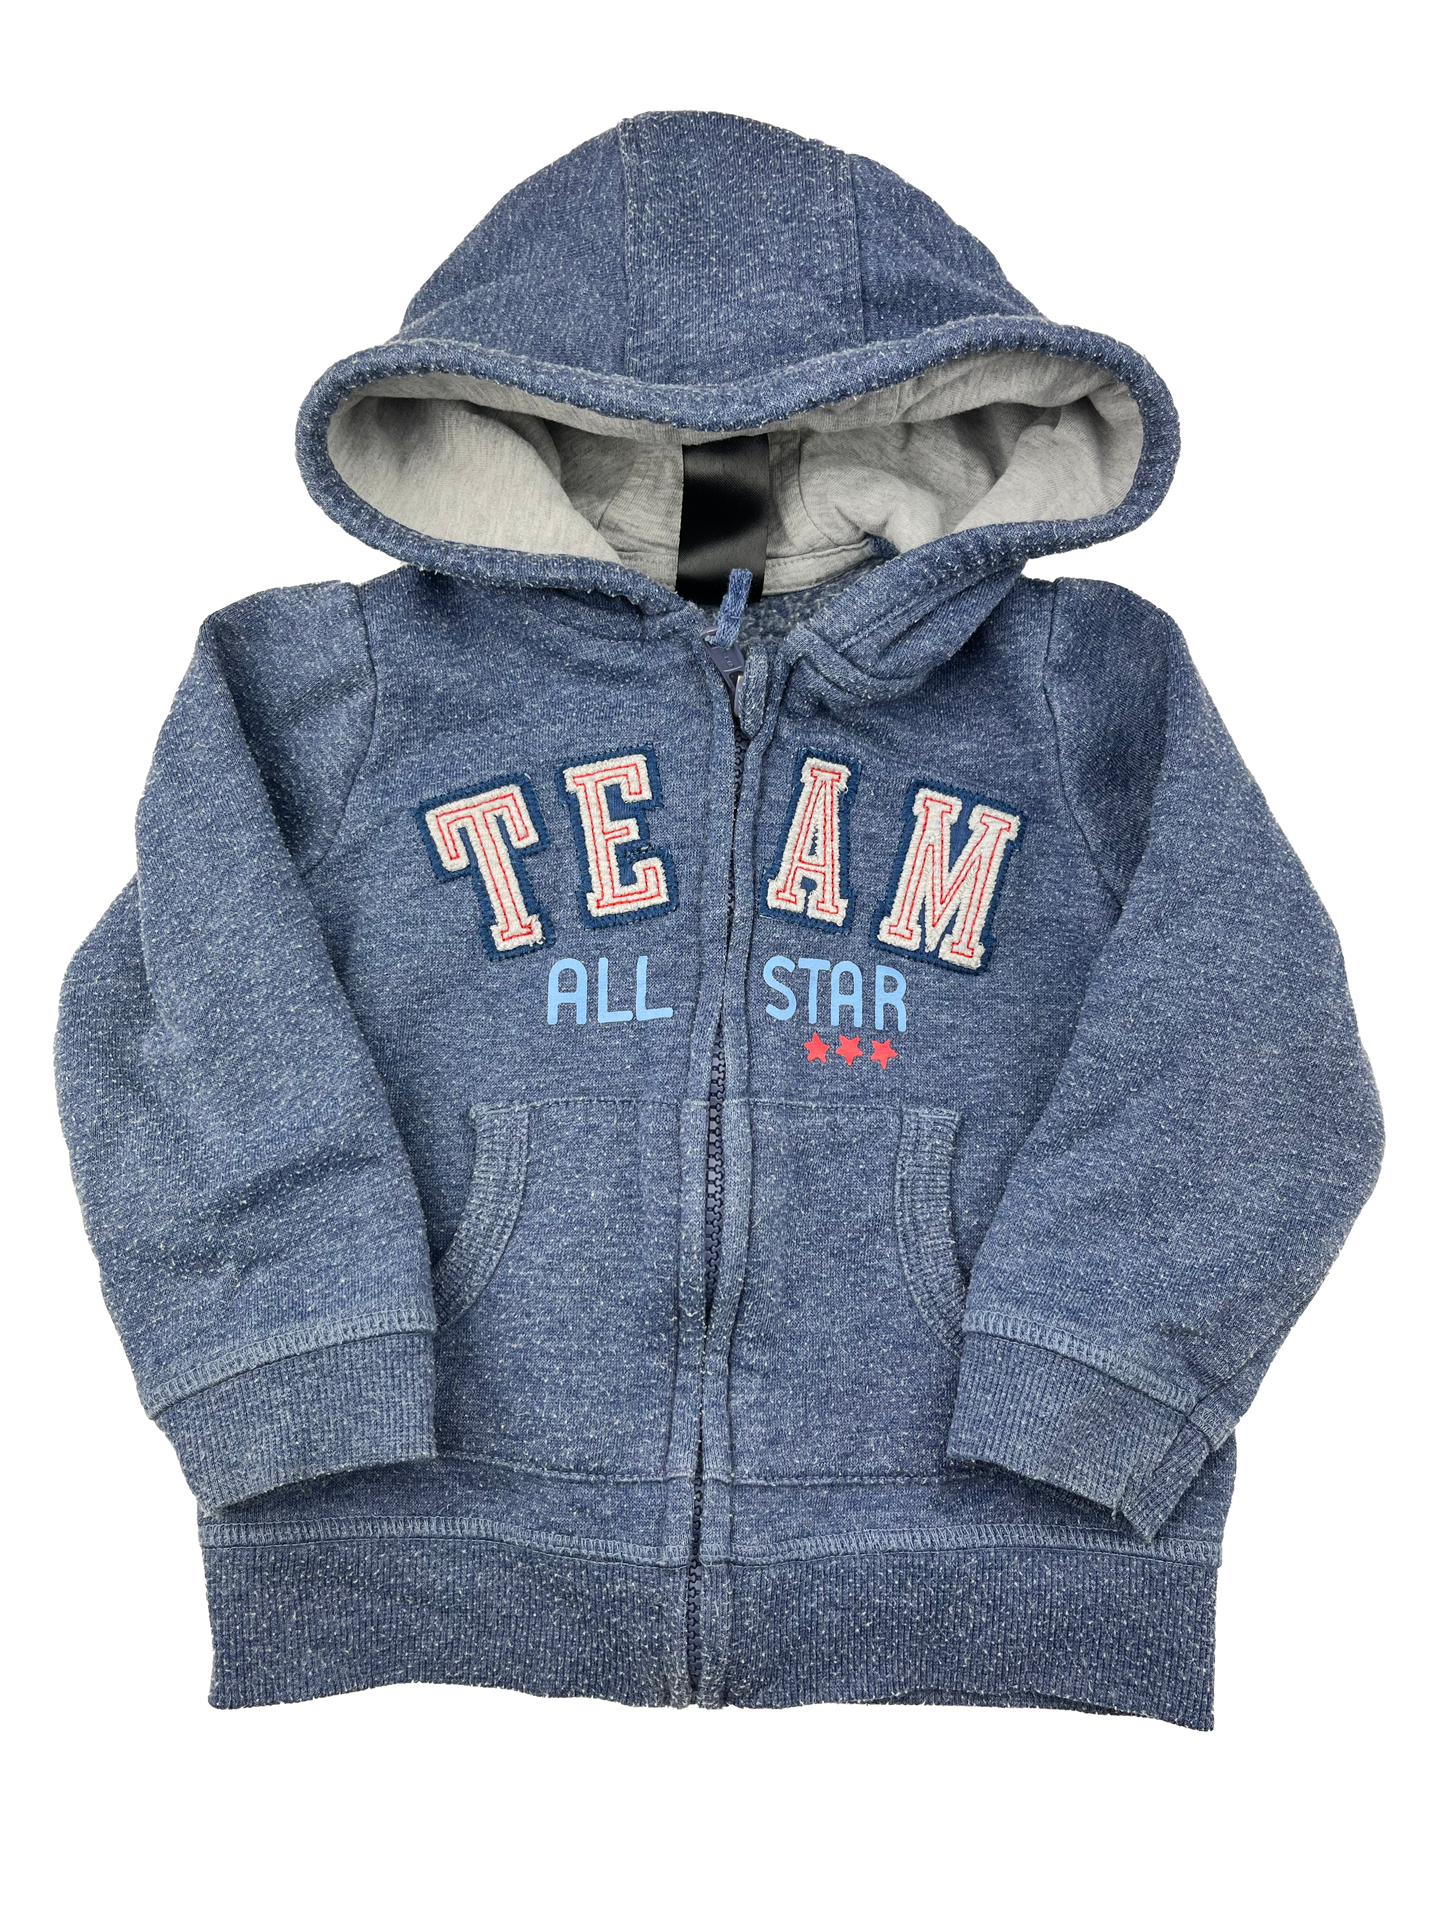 George Blue Zip-Up Hooded Sweater 12-18M